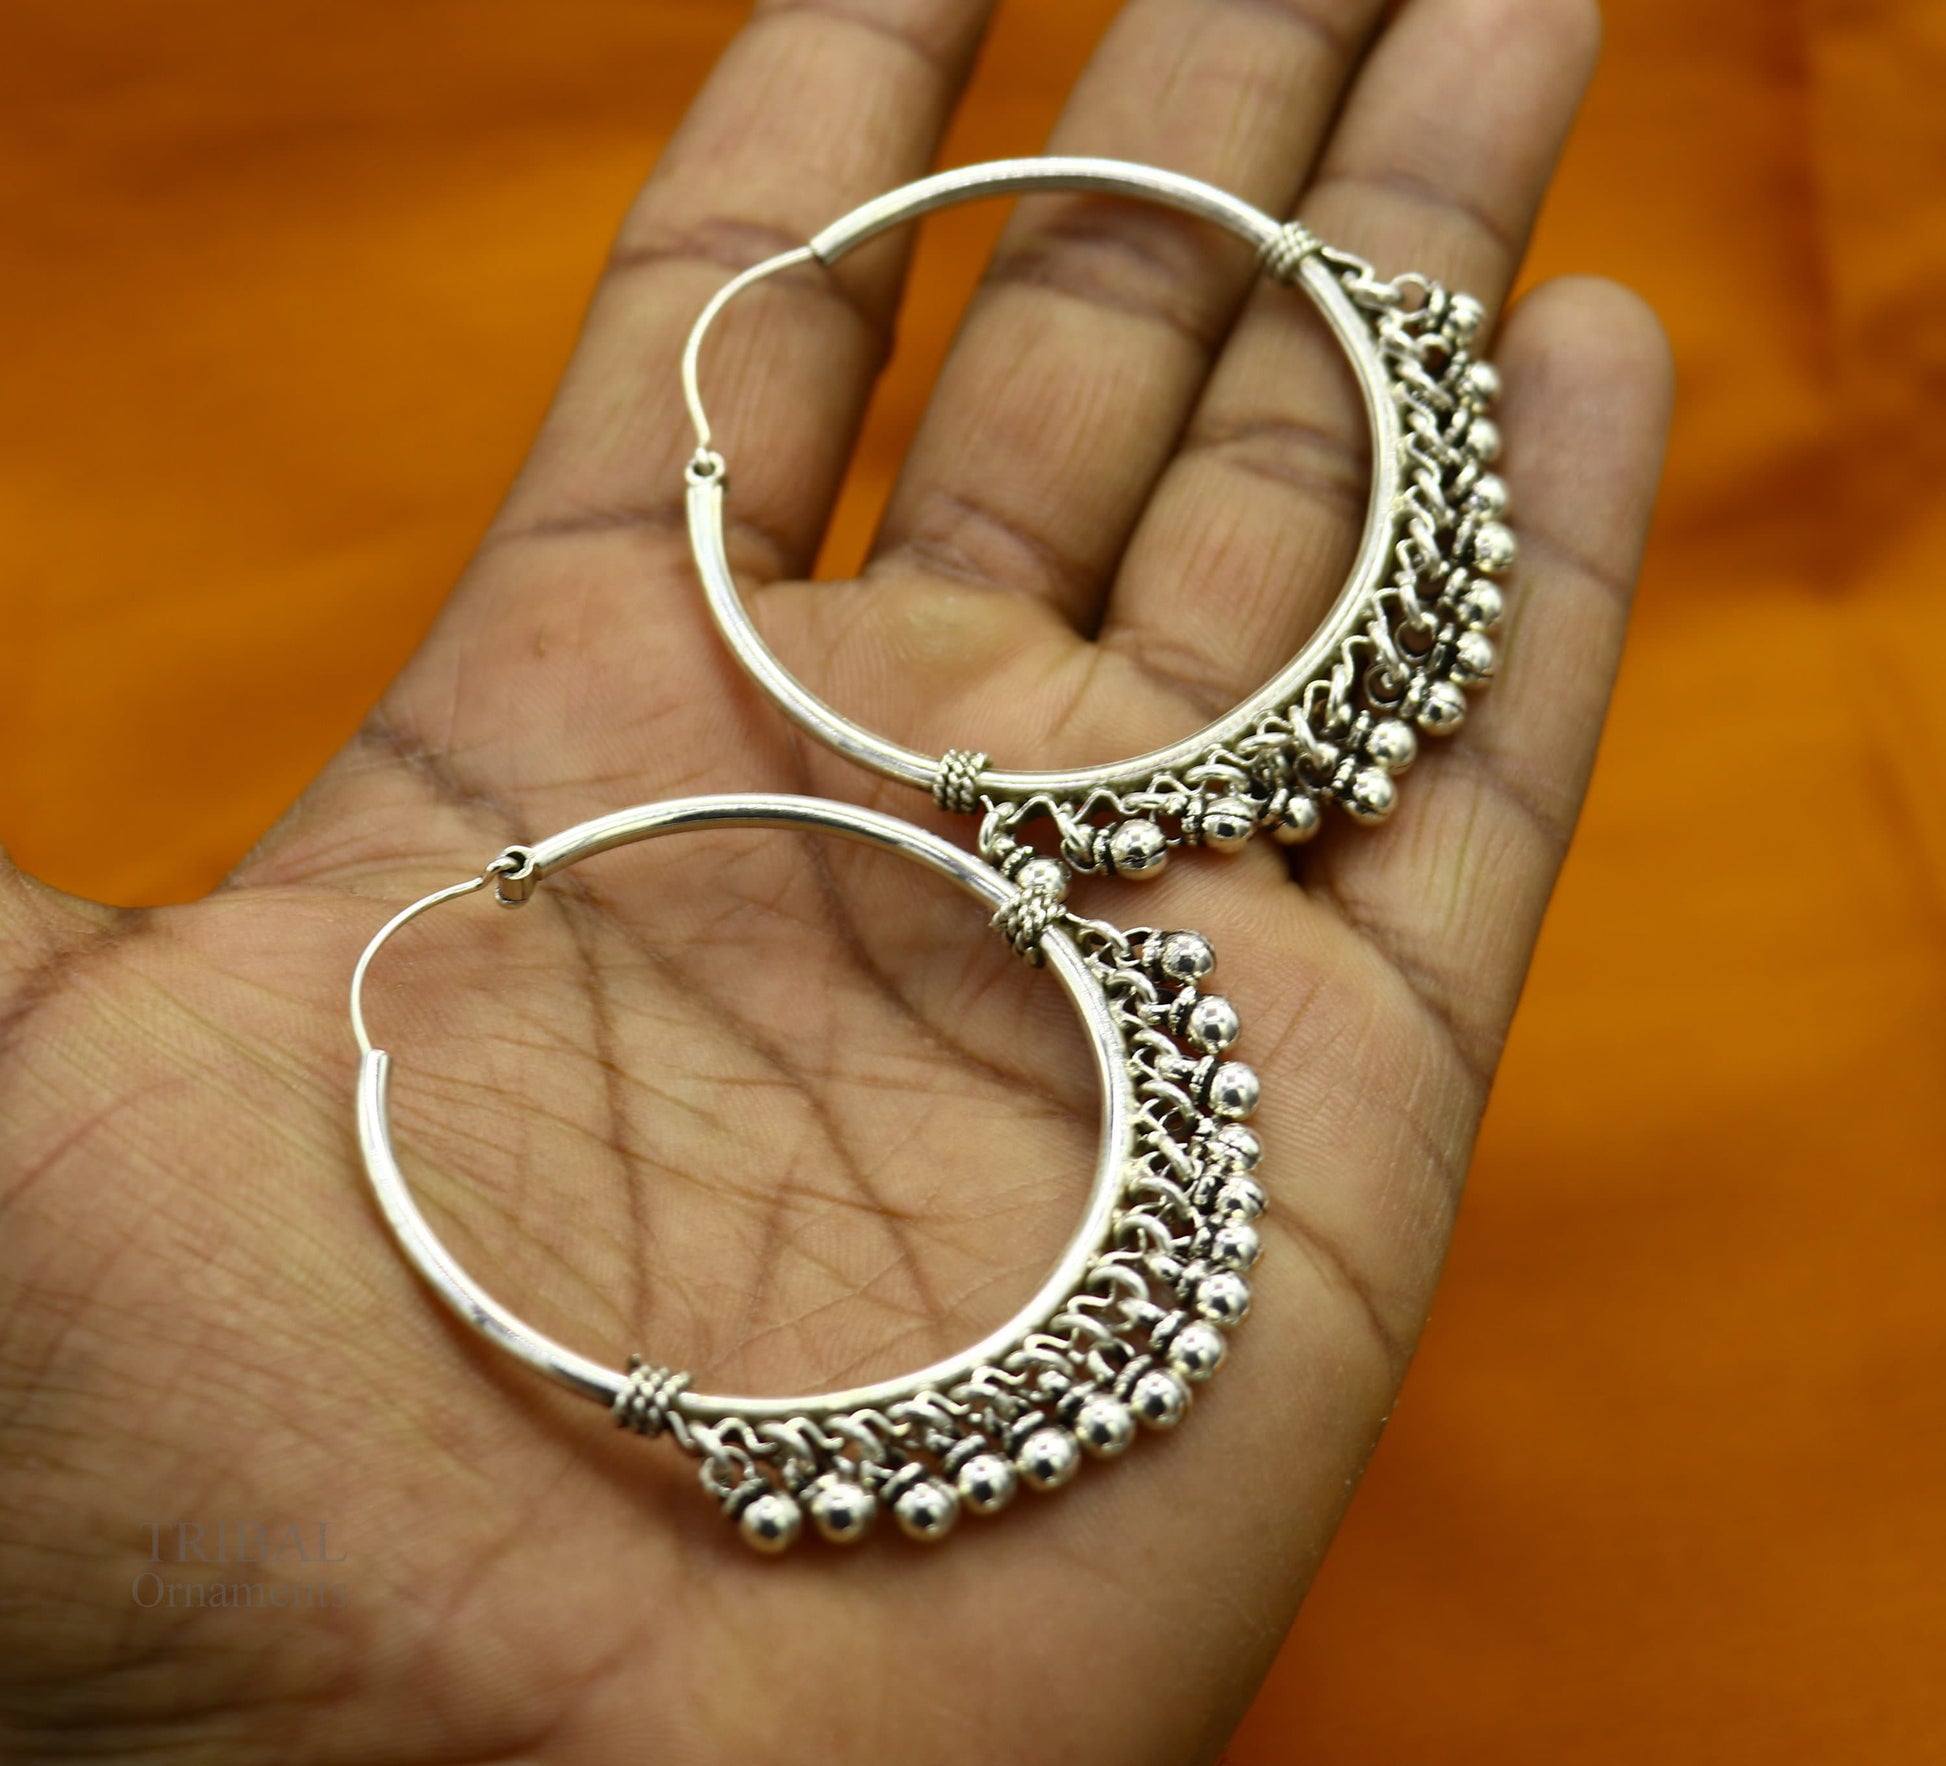 925 sterling silver handmade fabulous hoops earring with gorgeous hanging drops, customized large earring personalized gift s1012 - TRIBAL ORNAMENTS